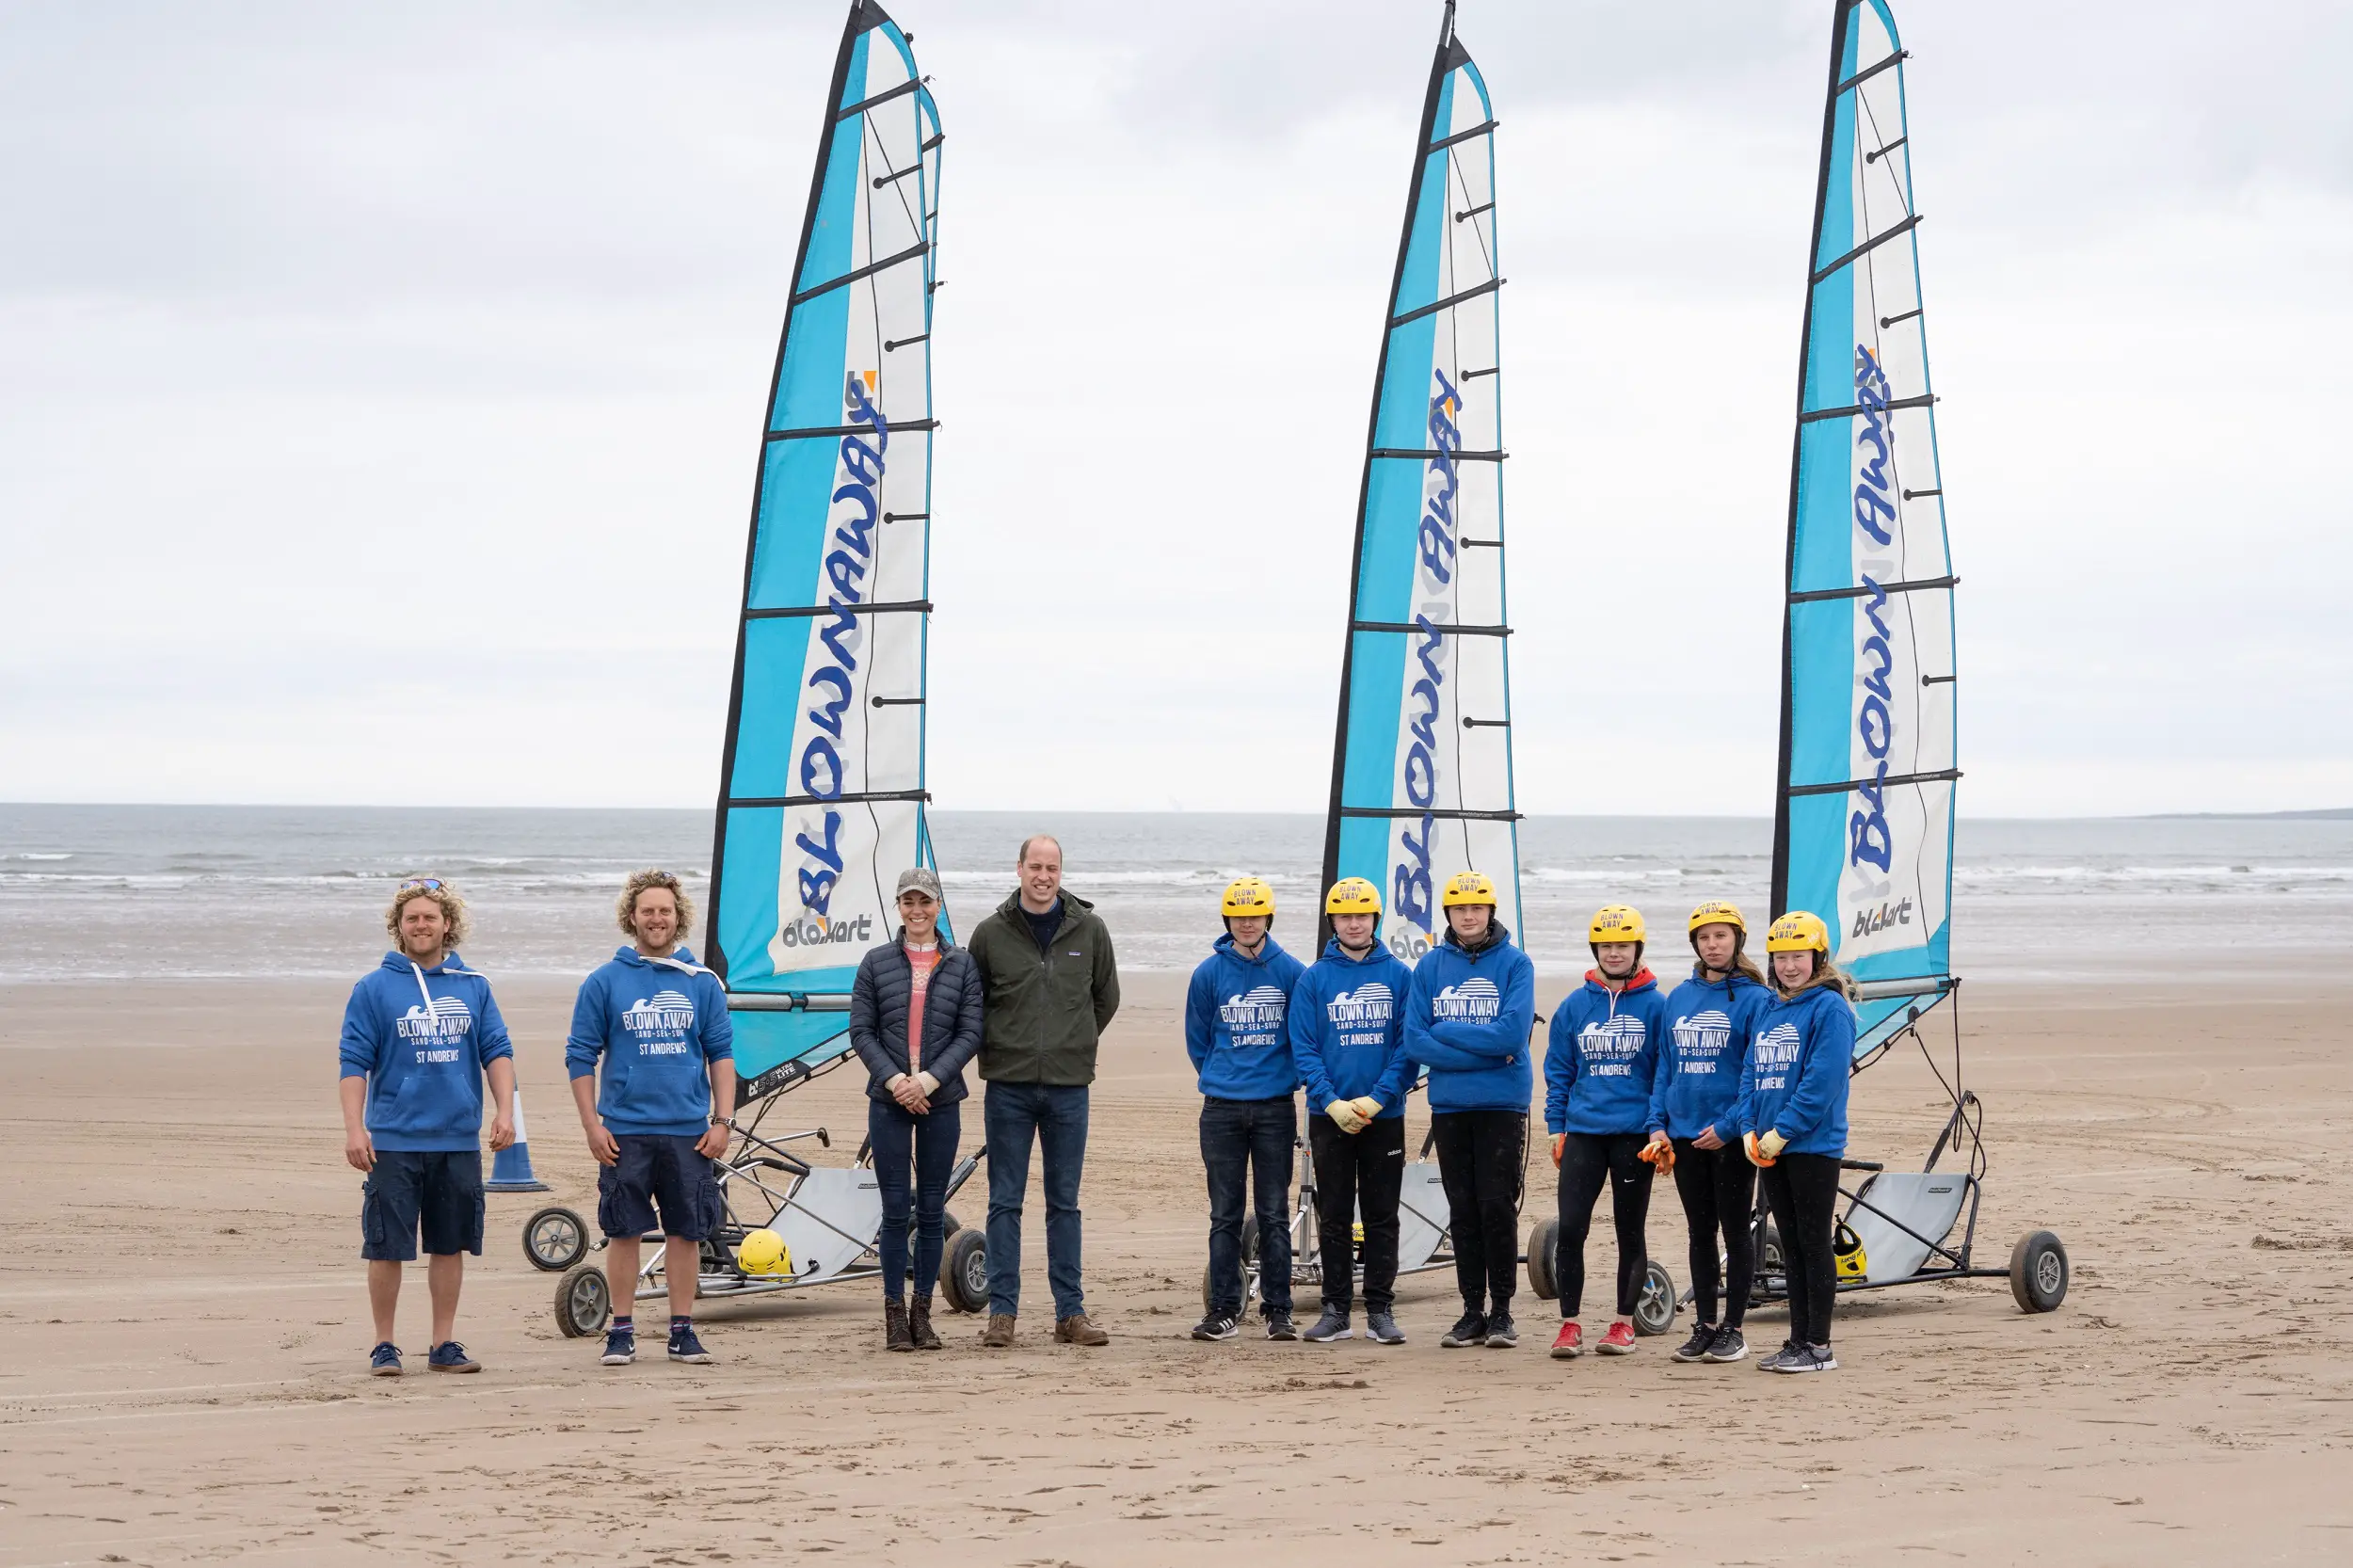 They were joined by the Fife Young Carers, a group that supports young carers in the area, helping them maintain their wellbeing through residential trips, workshops and outdoor activities